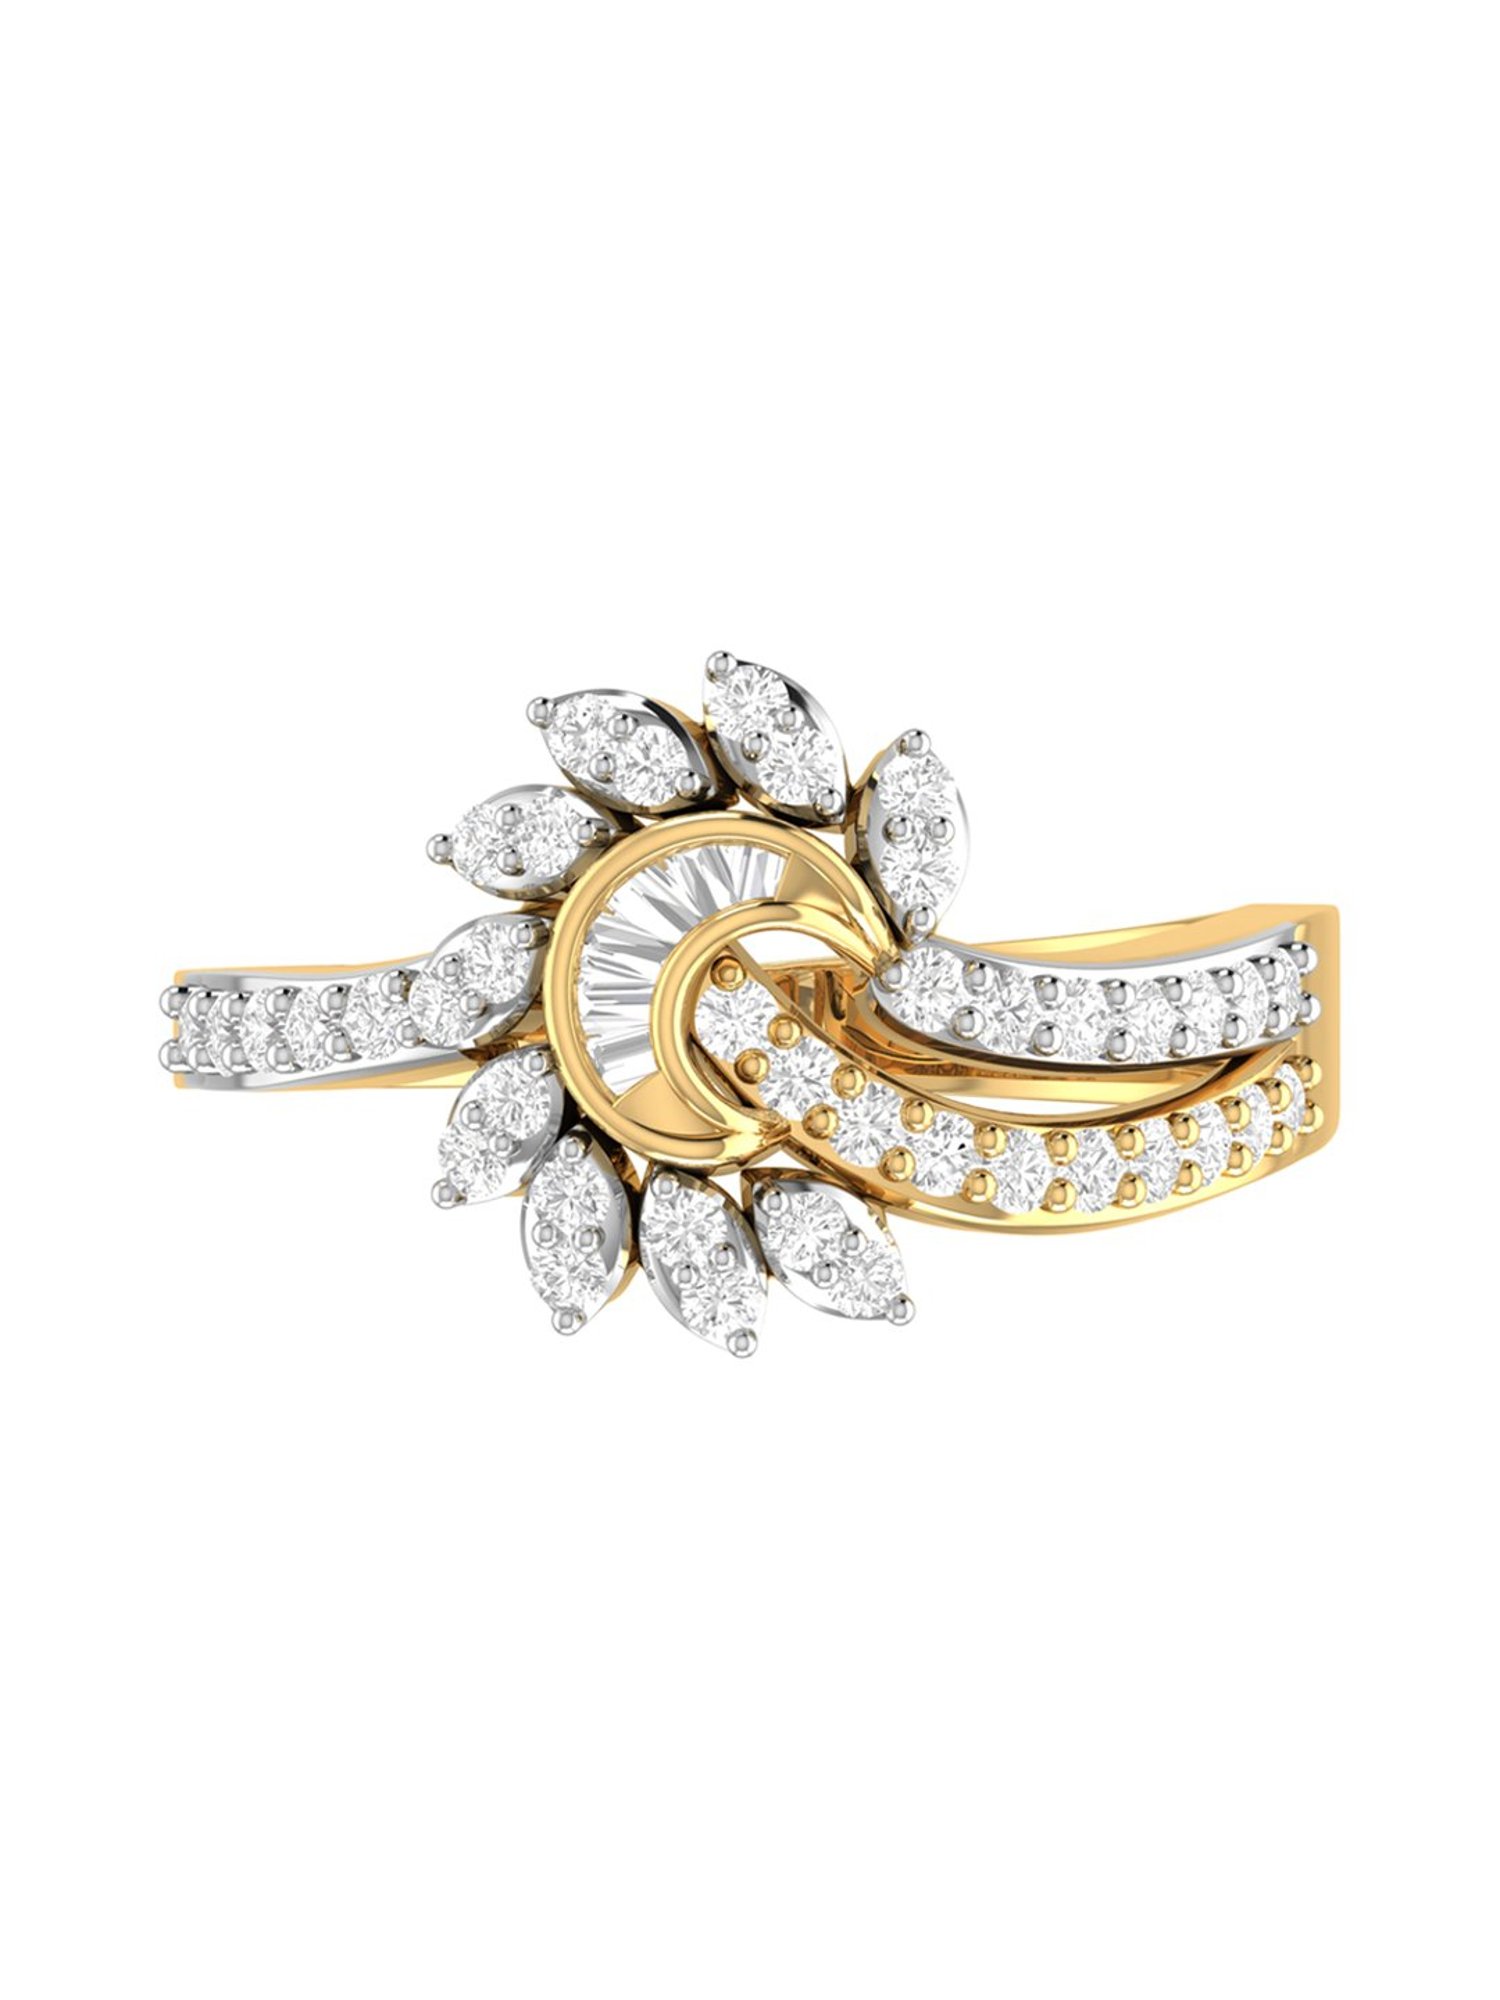 Engagement Rings Designs Online In India| PC Chandra Jewellers